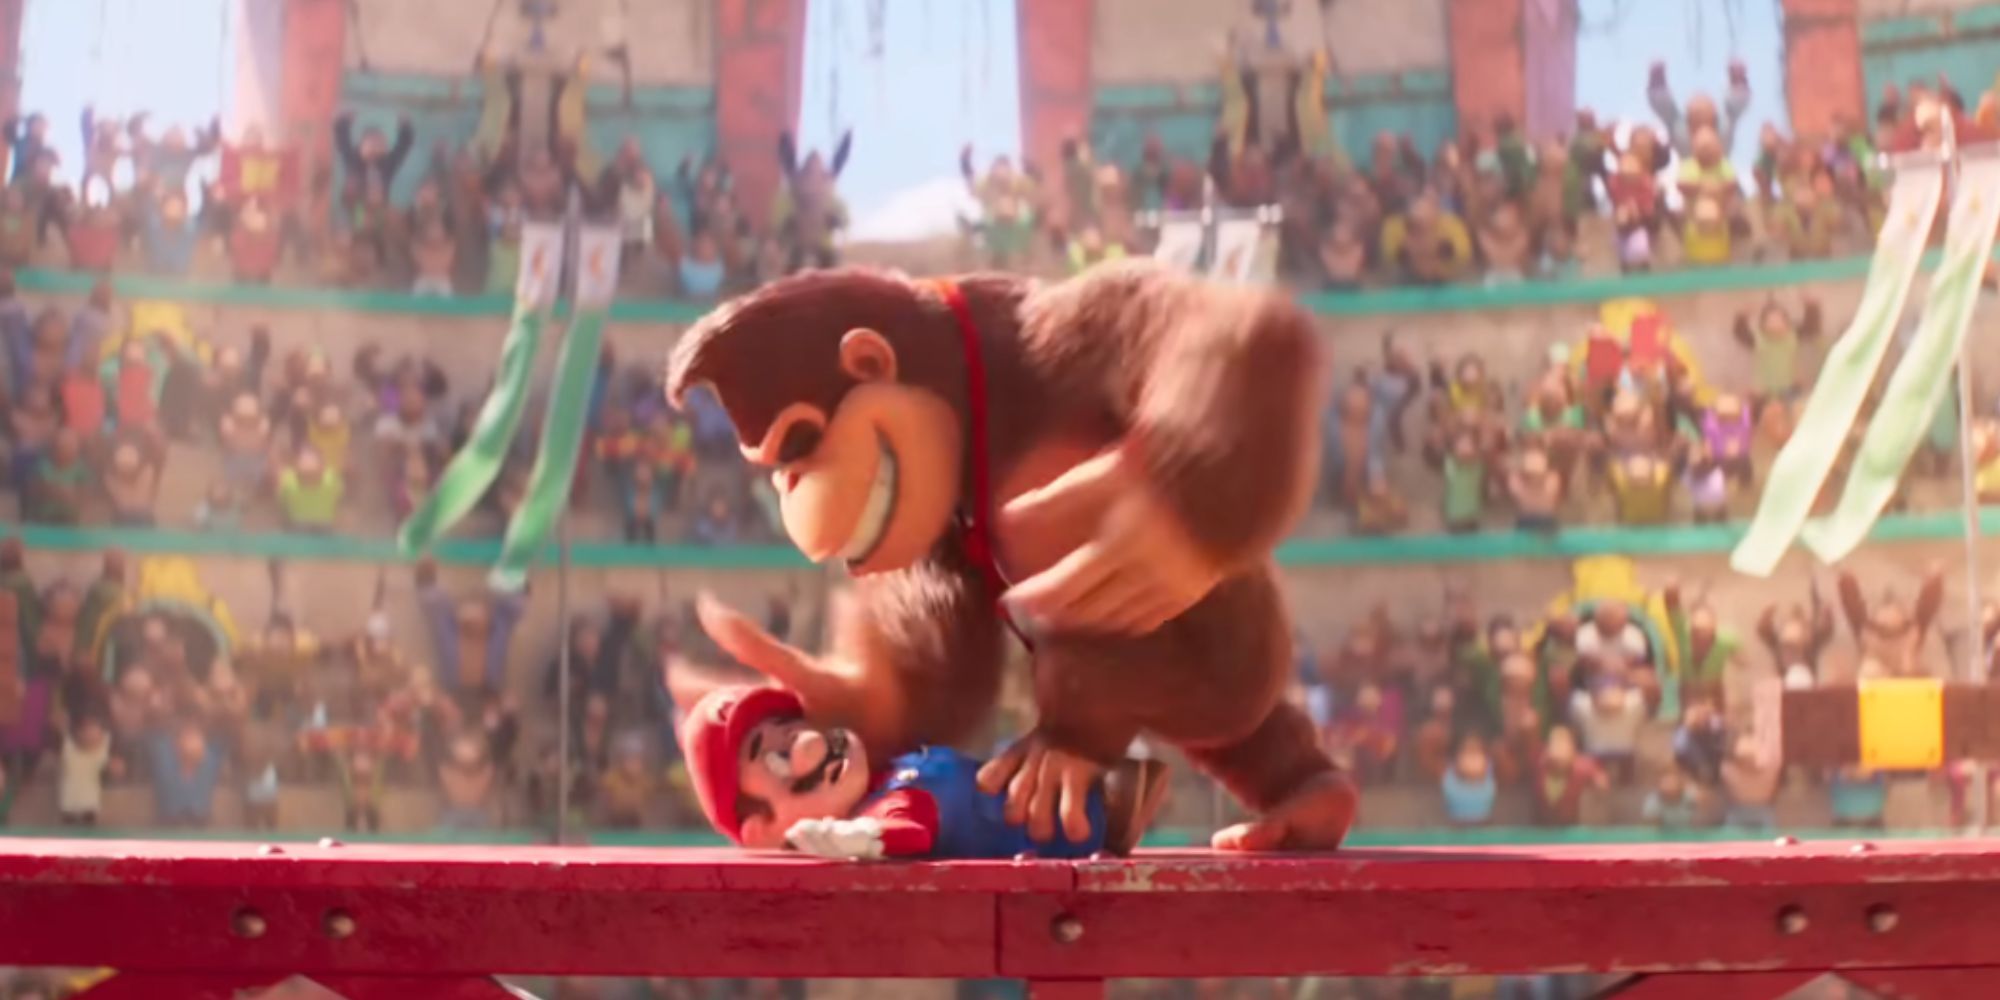 Donkey Kong attacks Mario in a colosseum full of spectators